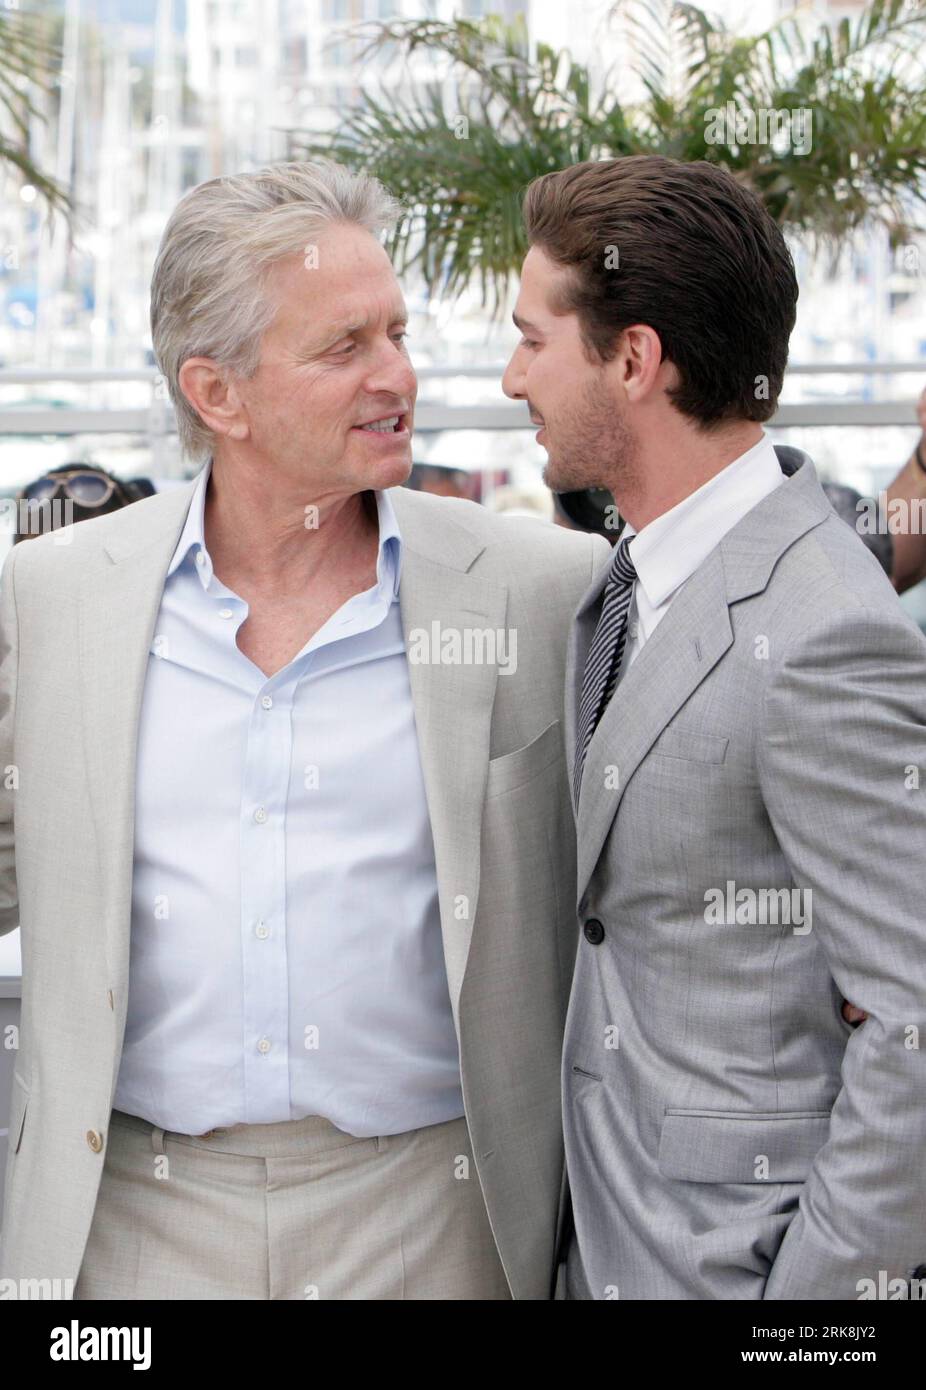 Bildnummer: 54047443  Datum: 14.05.2010  Copyright: imago/Xinhua (100514) -- CANNES, May 14, 2010 (Xinhua) -- Cast members Michael Douglas (L) and Shia LaBeouf talk during a photocall for the film Wall Street - Money Never Sleeps at the 63rd Cannes Film Festival in Cannes, France, May 14, 2010. (Xinhua/Dong Feng) (zl) (4)FRANCE-CANNES-FILM FESTIVAL-WALL STREET PUBLICATIONxNOTxINxCHN People Kultur Entertainment Film 63. Internationale Filmfestspiele Cannes Filmfestival Photocall kbdig xmk 2010 hoch  o00 La Beouf    Bildnummer 54047443 Date 14 05 2010 Copyright Imago XINHUA  Cannes May 14 2010 X Stock Photo